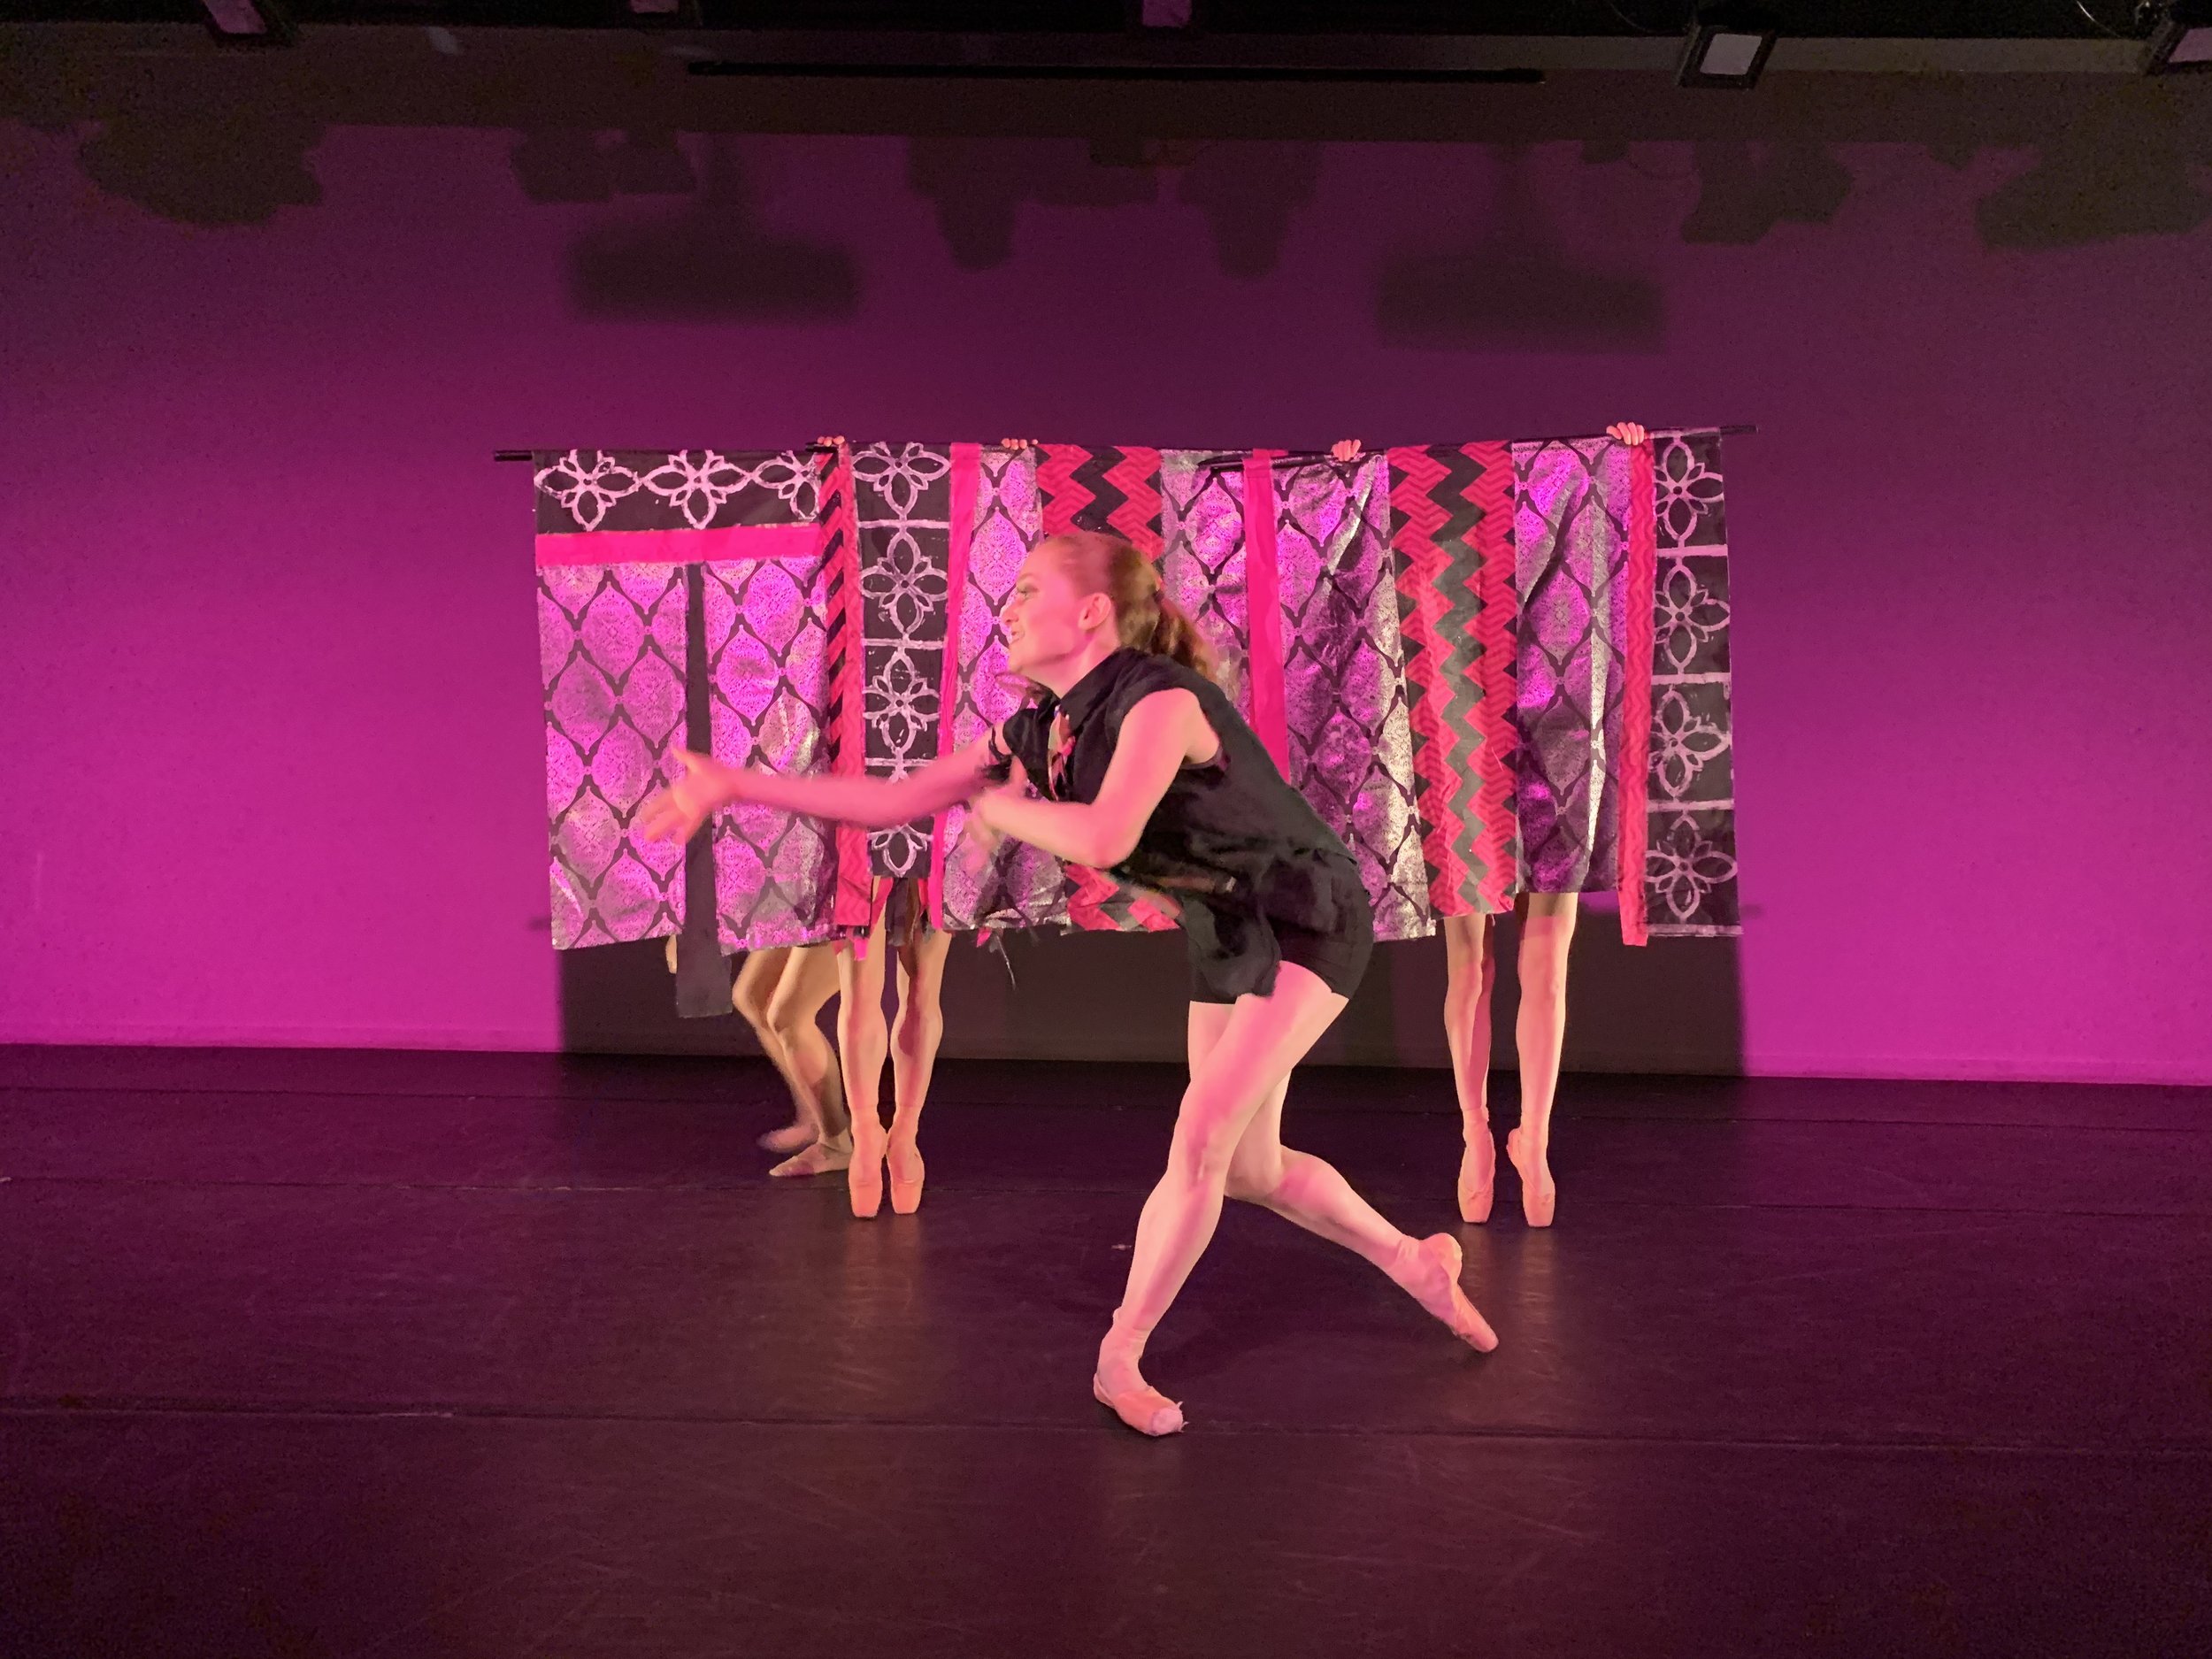  ”Strategy Royale” by choreographer Mari Meade in collaboration with artist Margaret Lanzetta, featuring dancers Allison Beler, Ali Block, Bethany Kellner and Olivia Miranda 